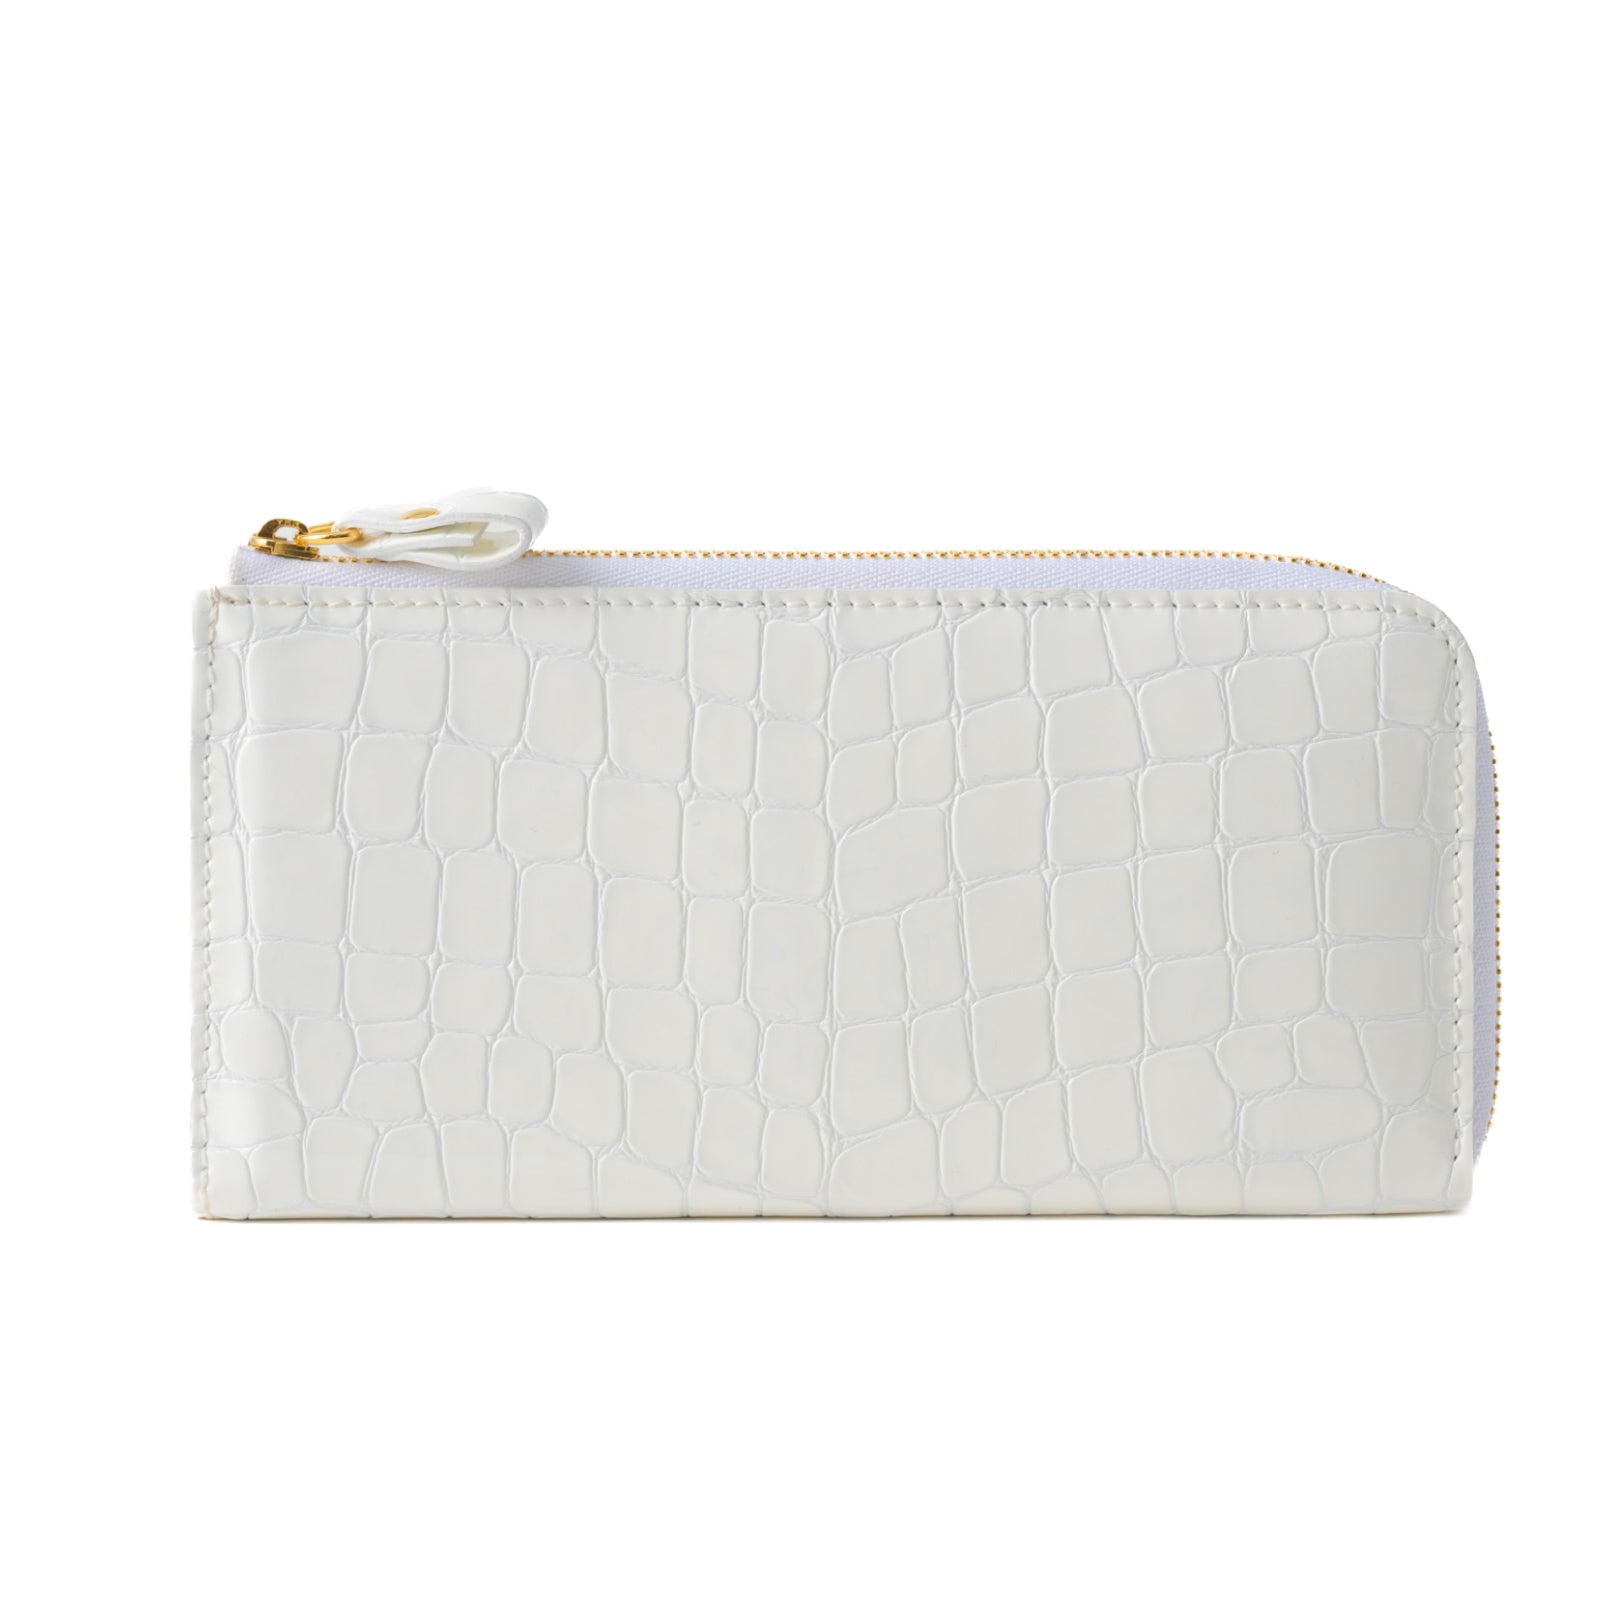 L-shaped zipper long wallet in Chromer leather / Pure White